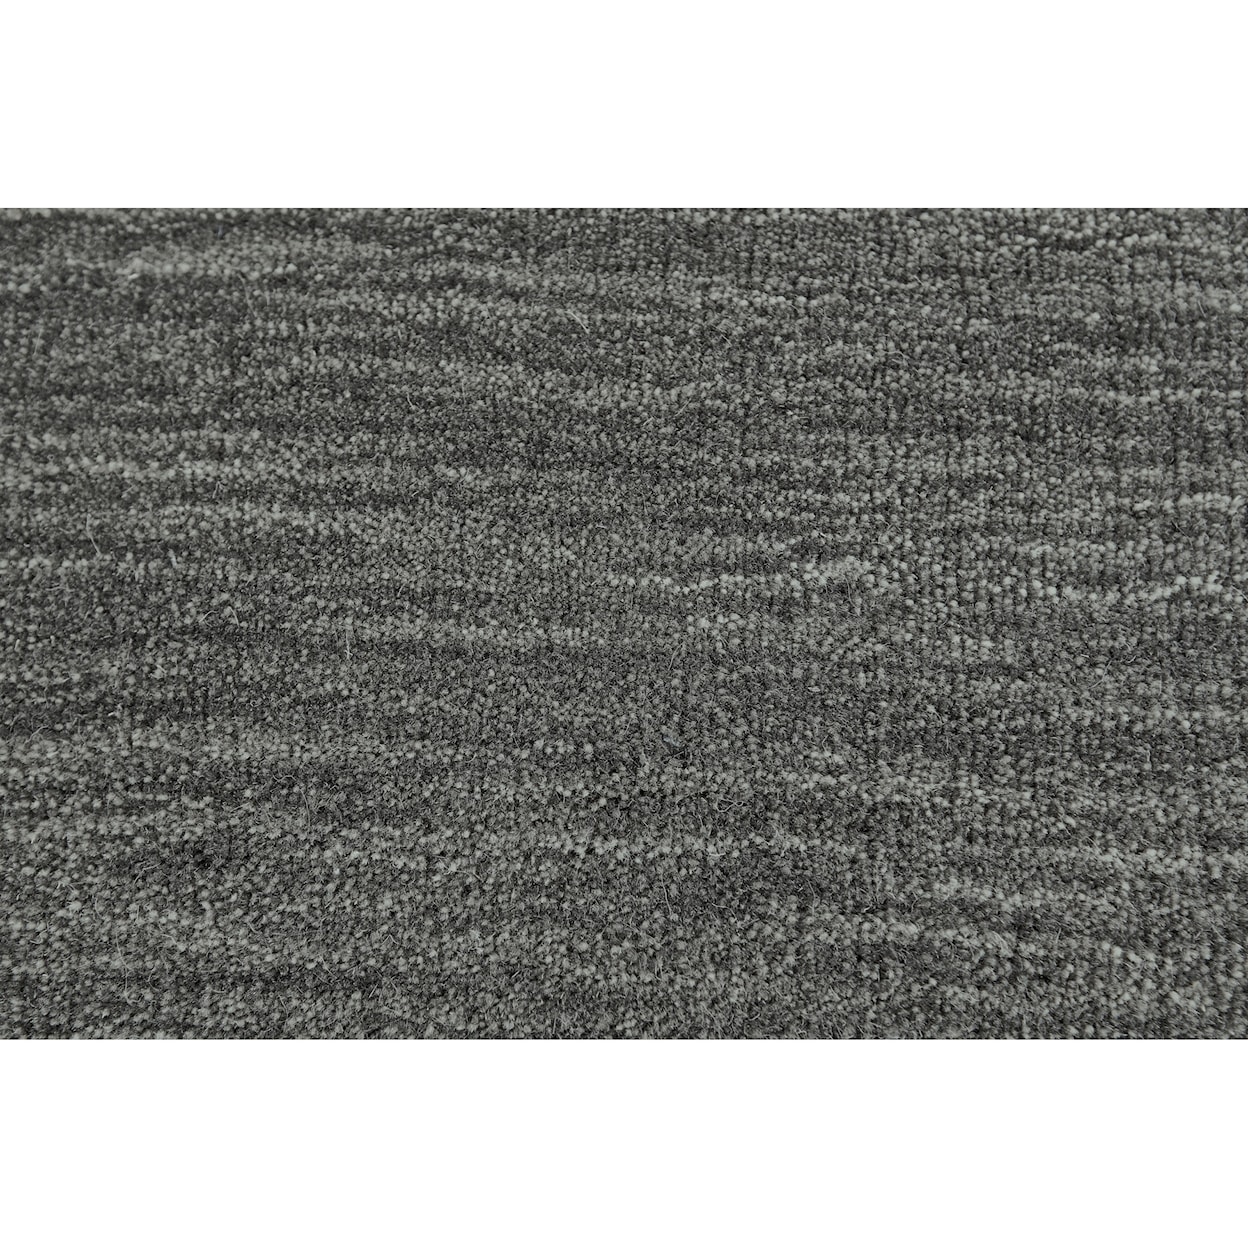 Feizy Rugs Luna Charcoal 9'-6" x 13'-6" Area Rug